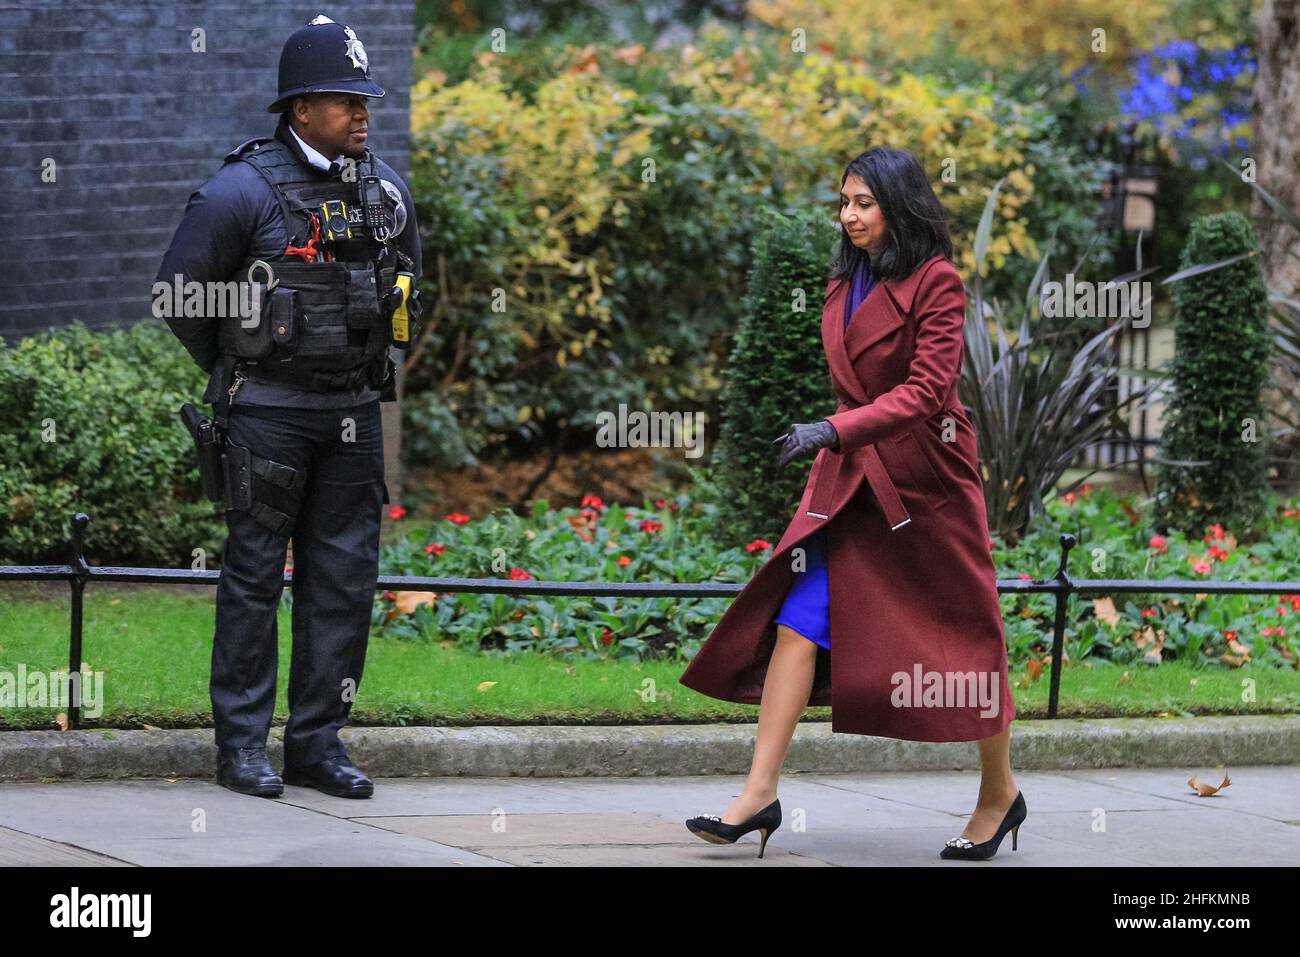 Suella Braverman QC MP, Attorney General, British Conservative Party politician, walks past police officer in Downing Street, London Stock Photo